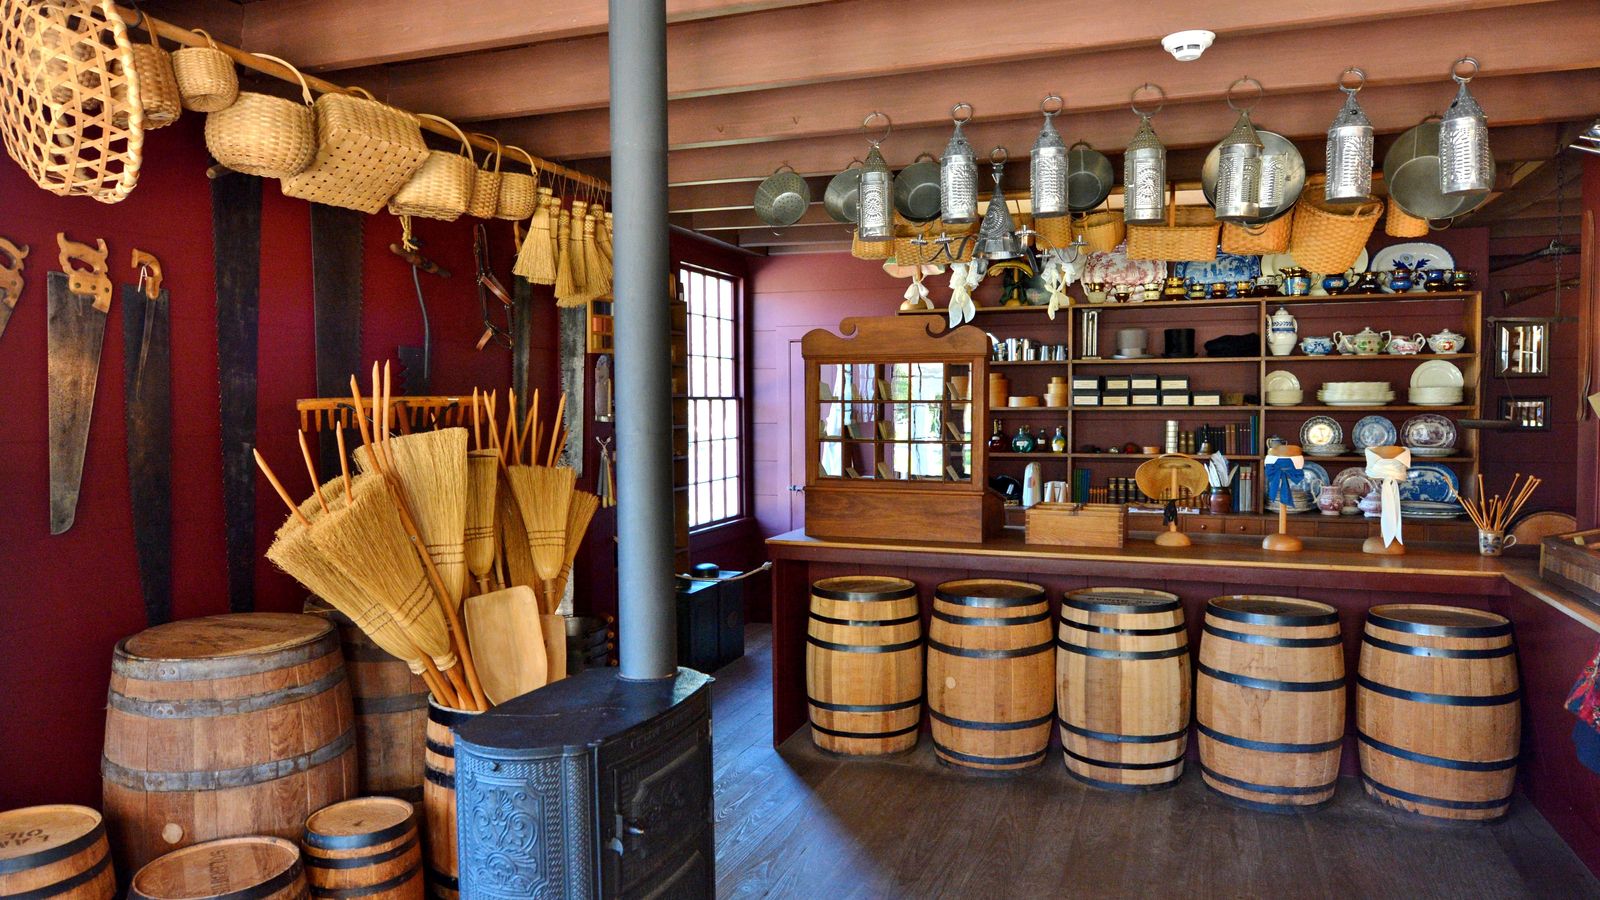 A small wooden store filled with goods from the pioneer era, such as barrels, brooms, saws, pots, and pans.